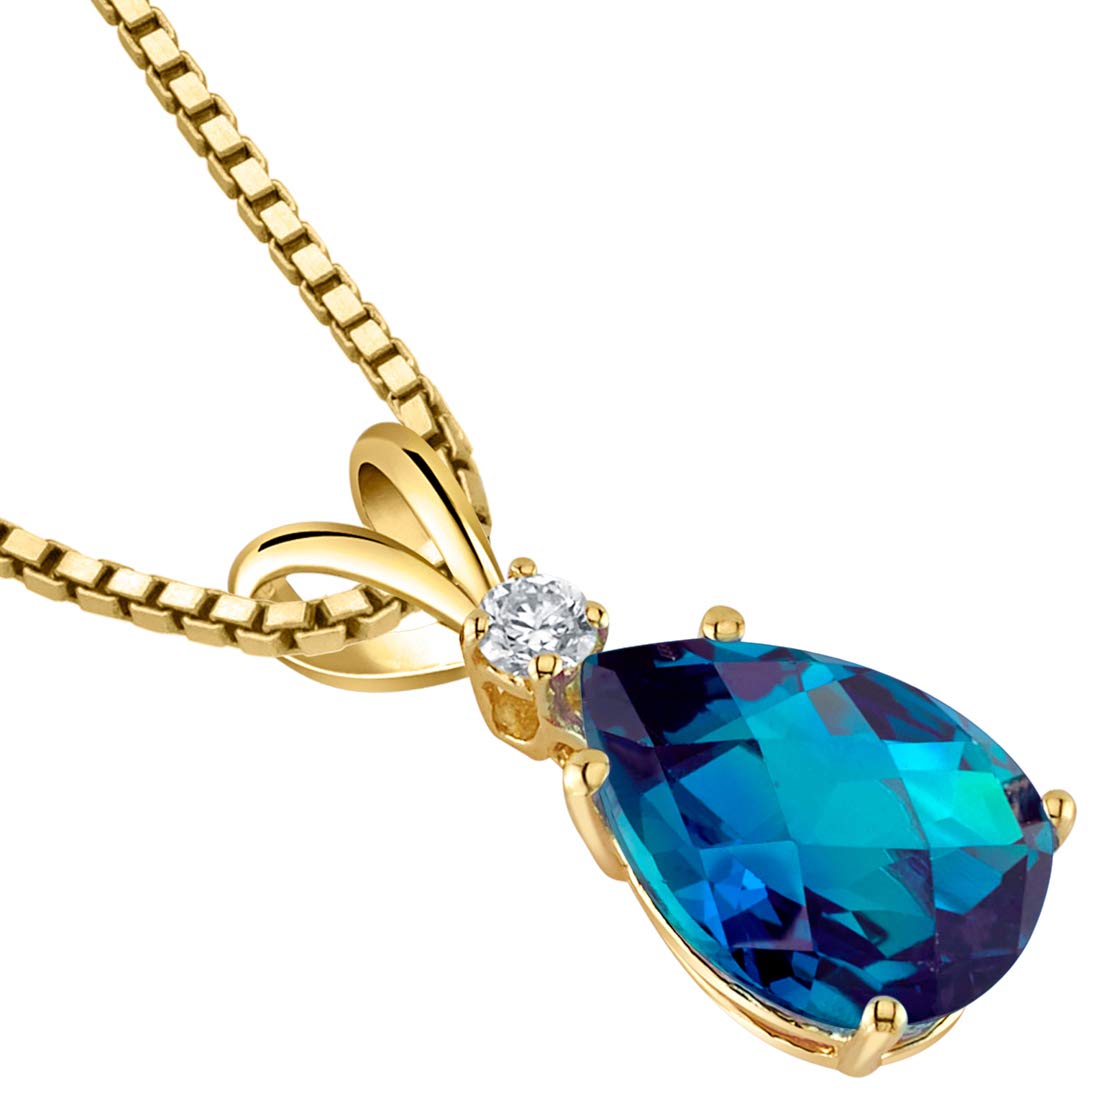 Peora Created Alexandrite with Genuine Diamond Pendant for Women 14K Yellow Gold, 2.55 Carats total, Color-Changing Pear Shape